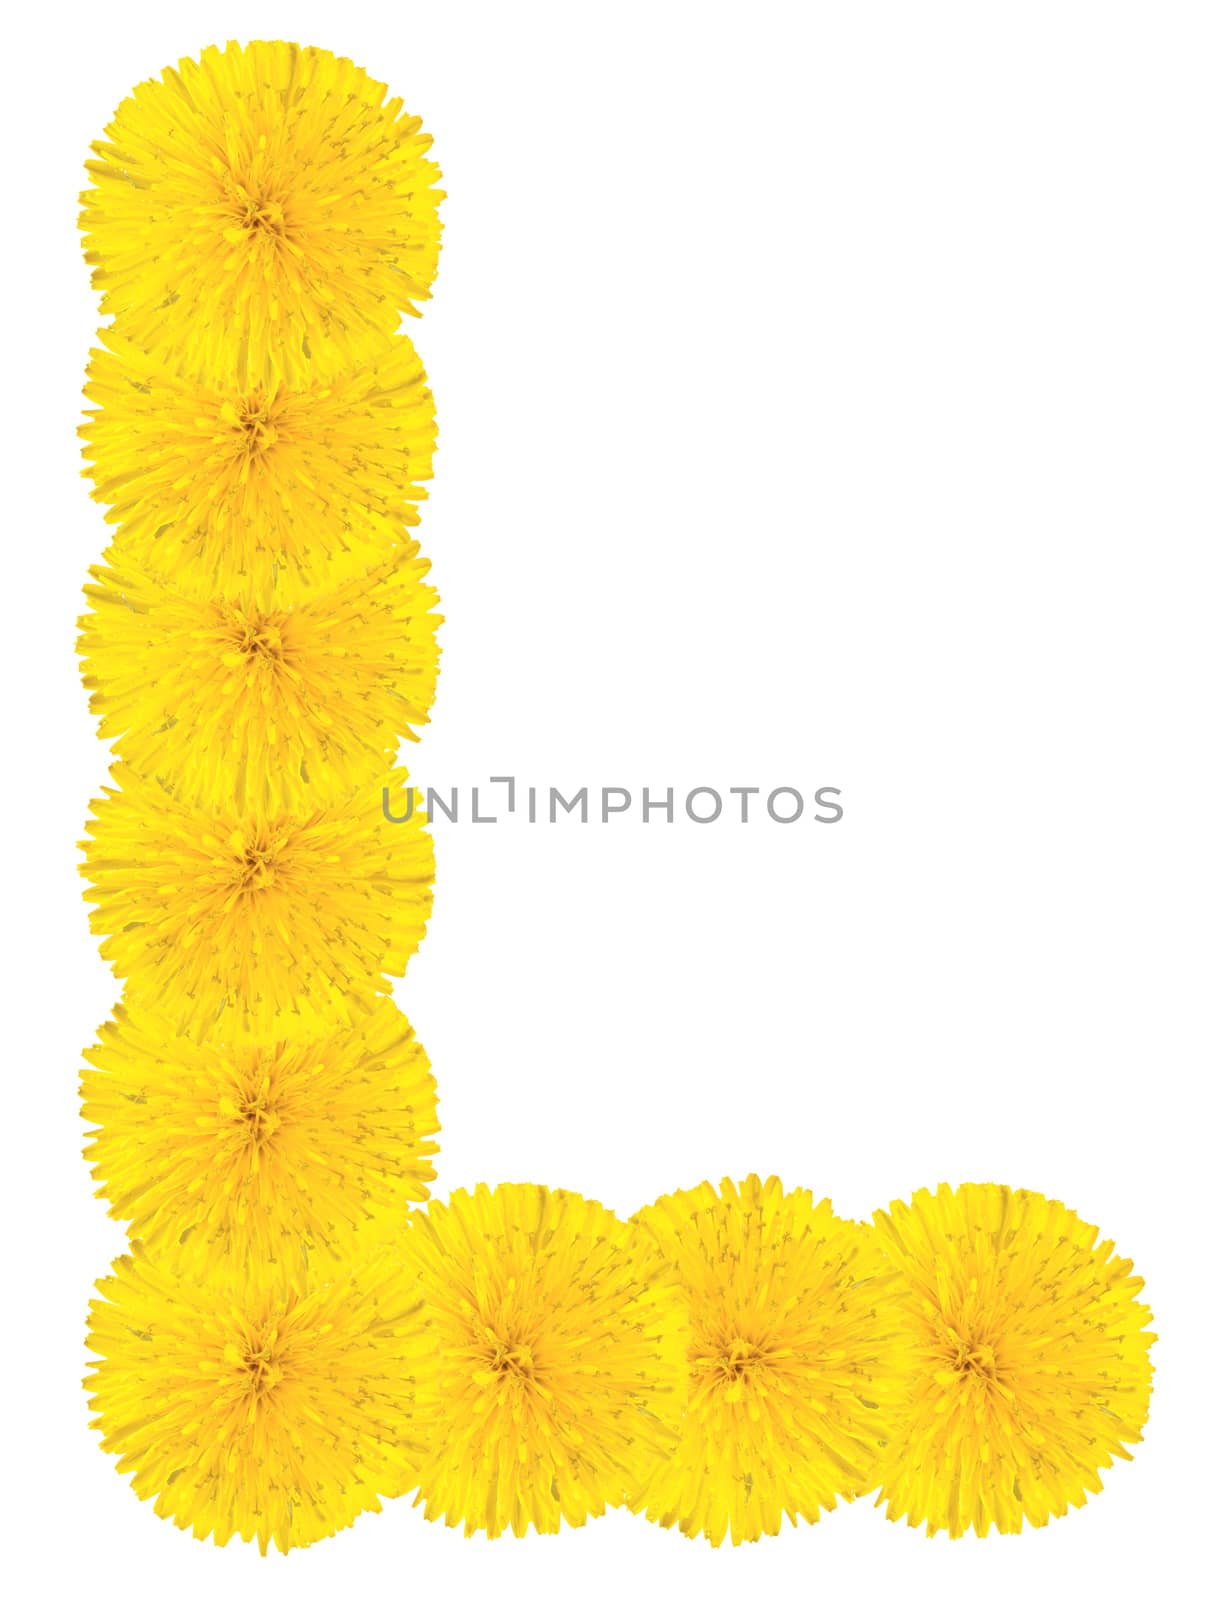 Letter L made from dandelions by Valengilda